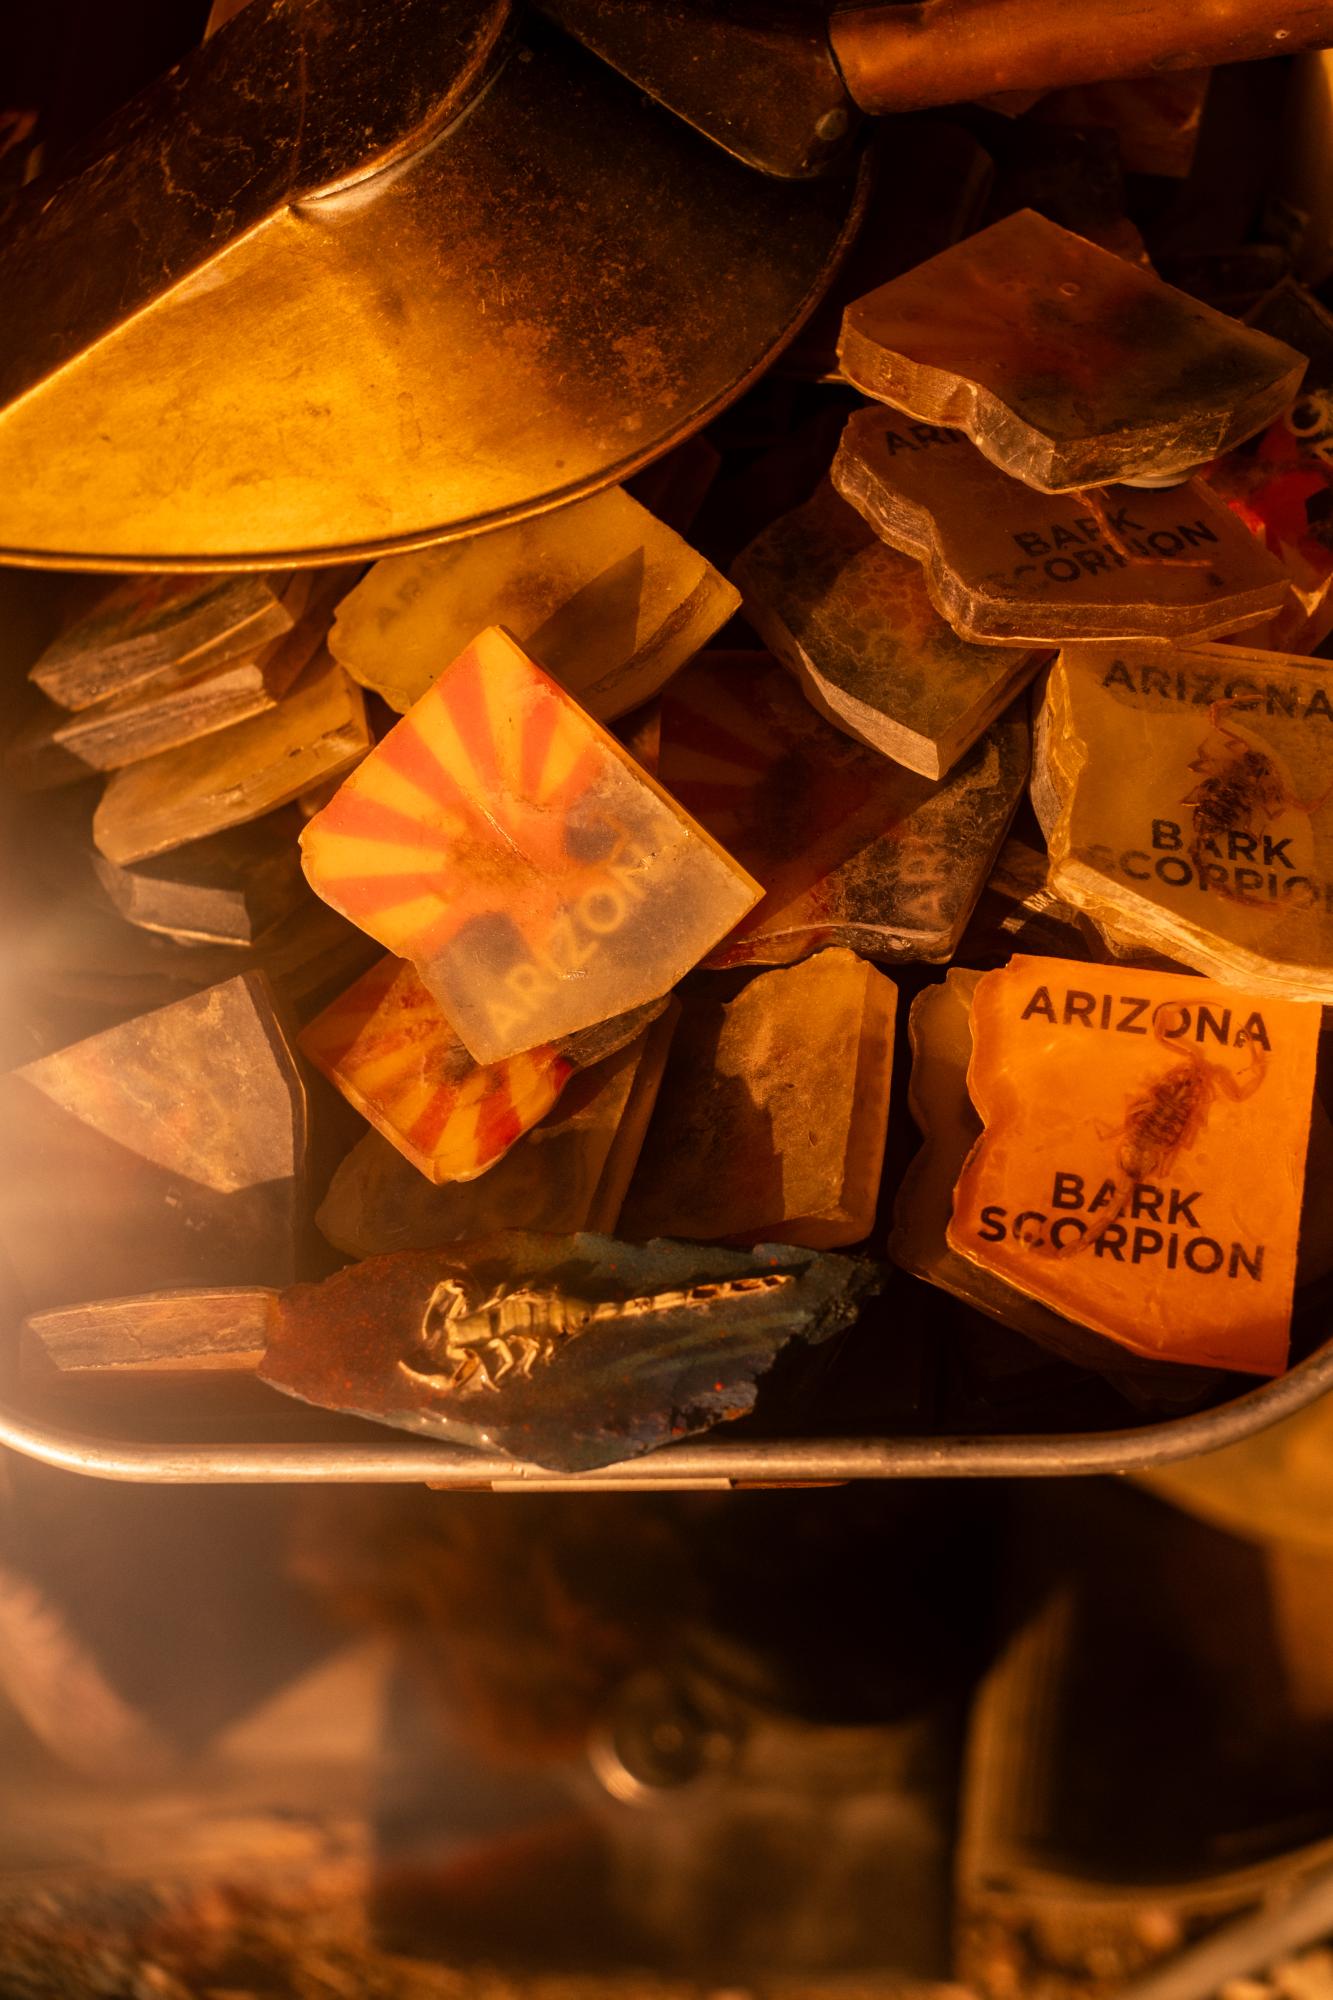 A Warm Winter (An Ongoing Journey) - Scorpion magnets found at the swap meet. Quartzsite,...